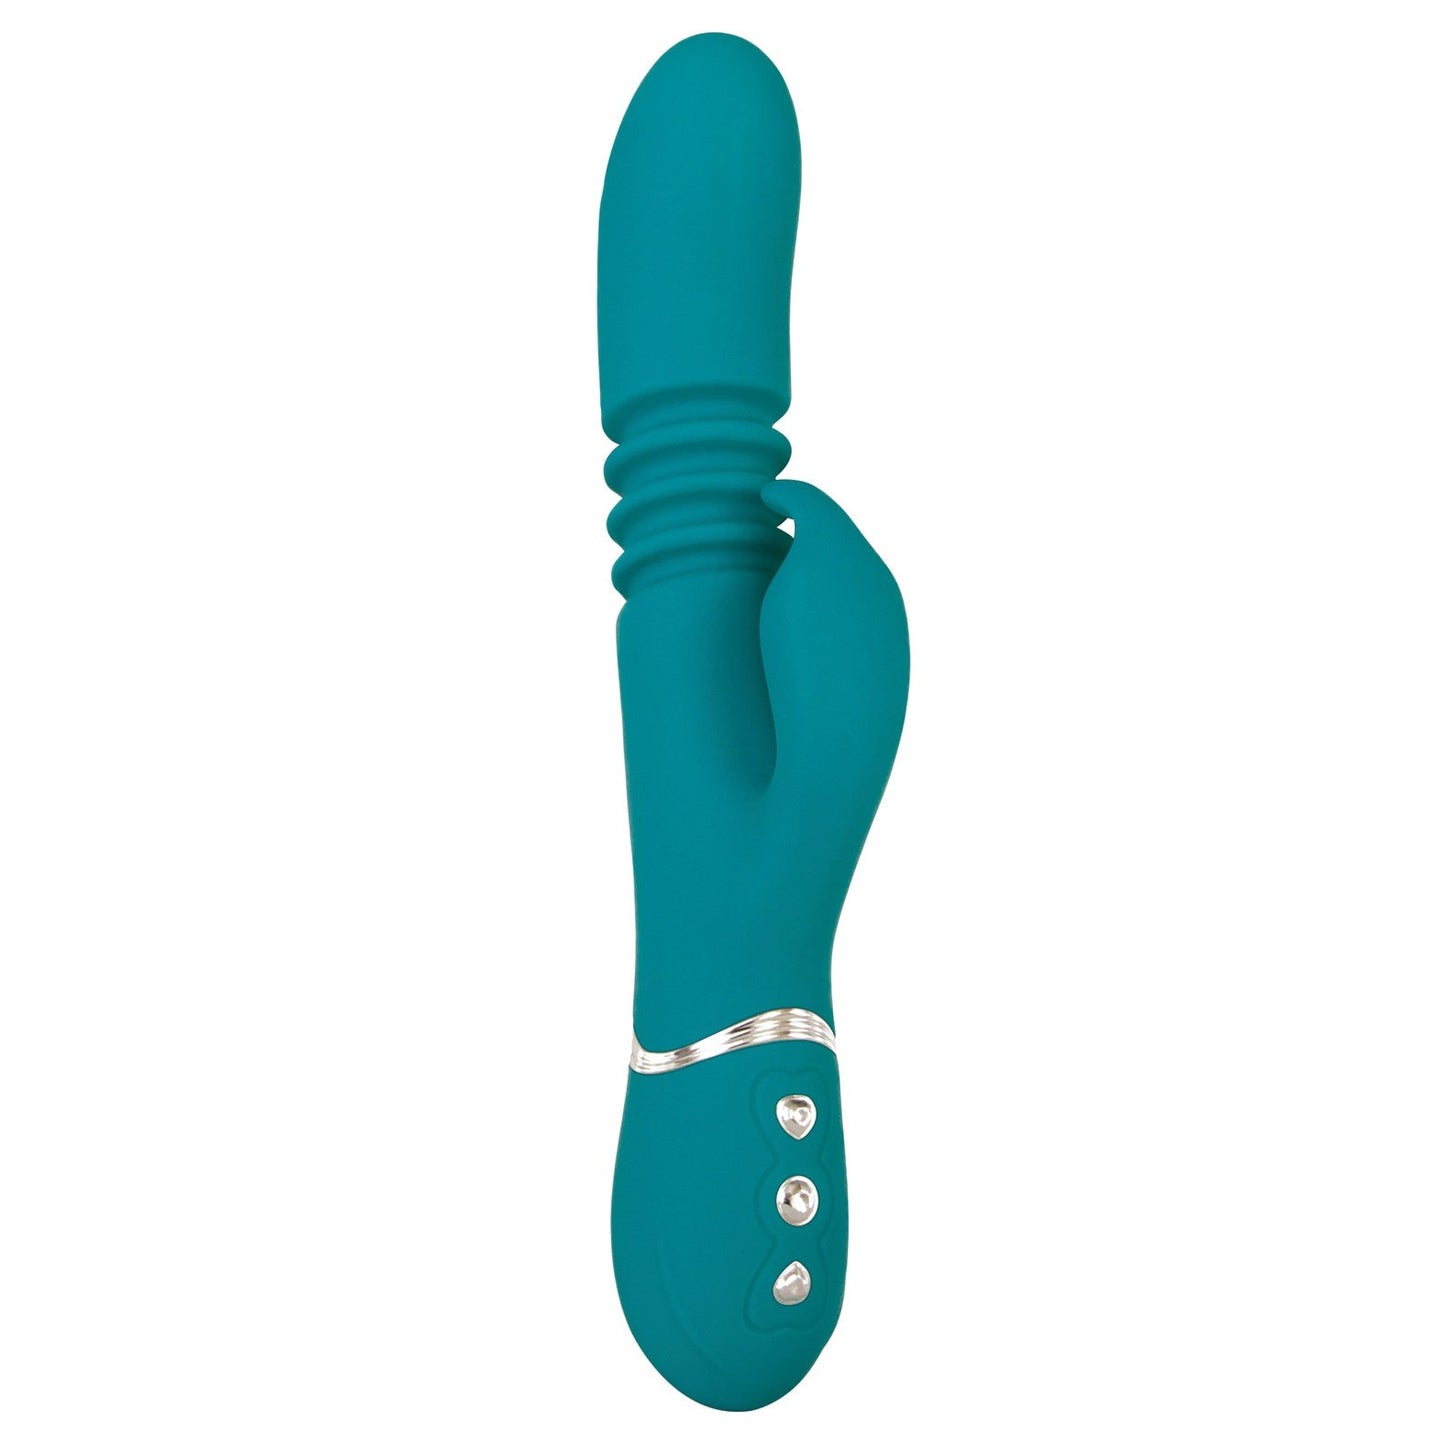 Adam & Eve Eve's Rechargeable Thrusting Rabbit G-bliss O-maker - Green